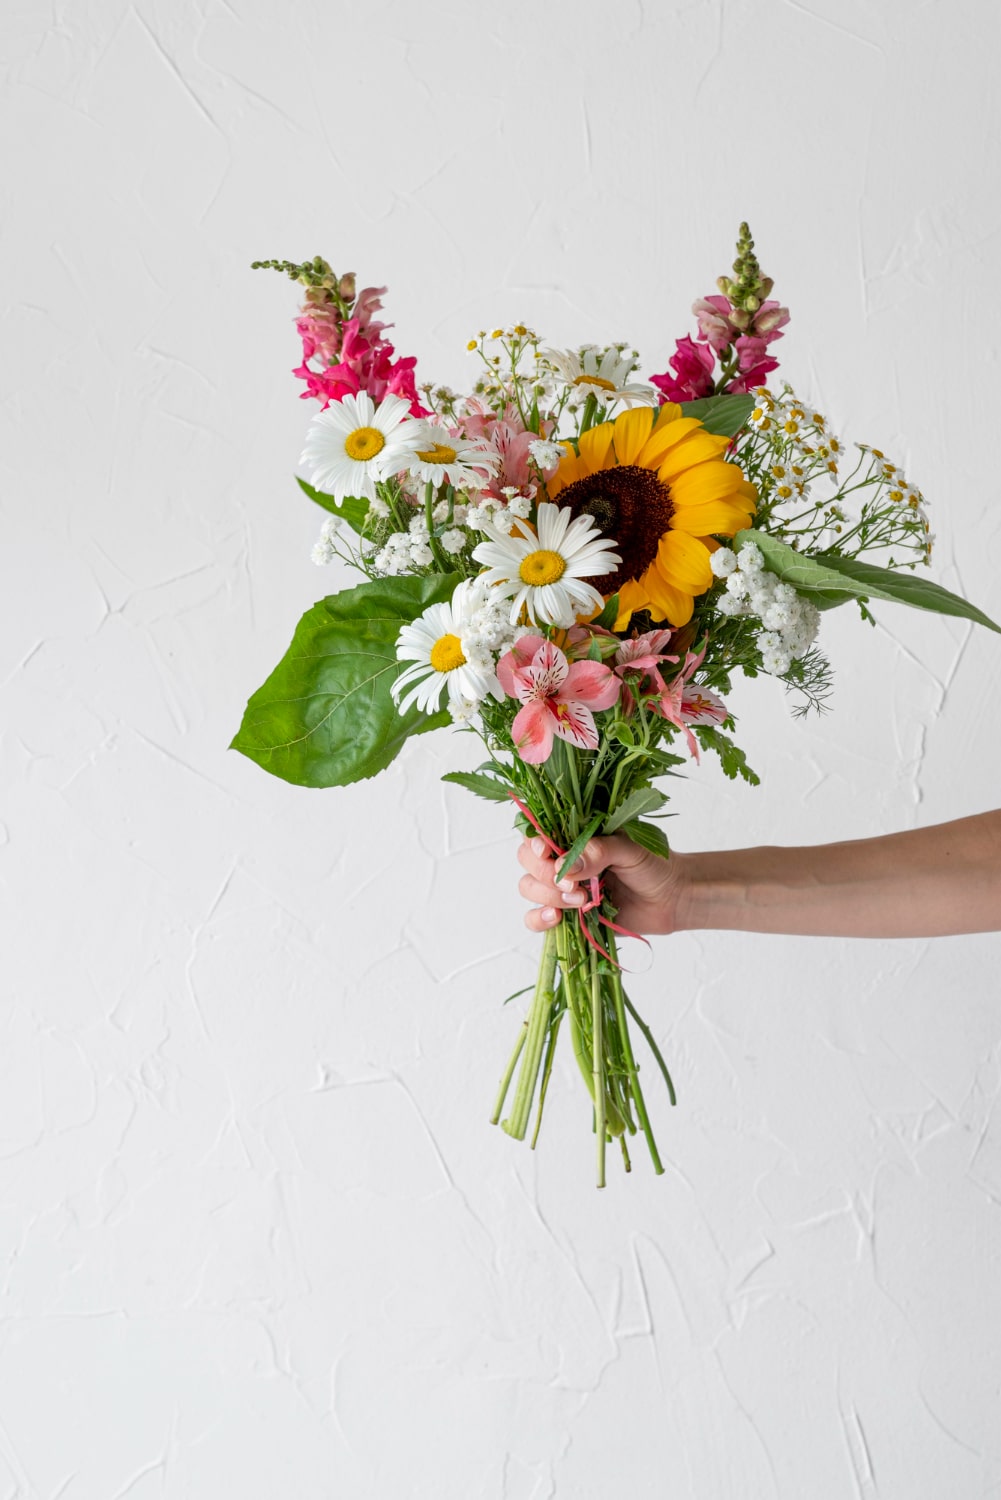 Top Reasons To Buy Flowers From Your Local Florist